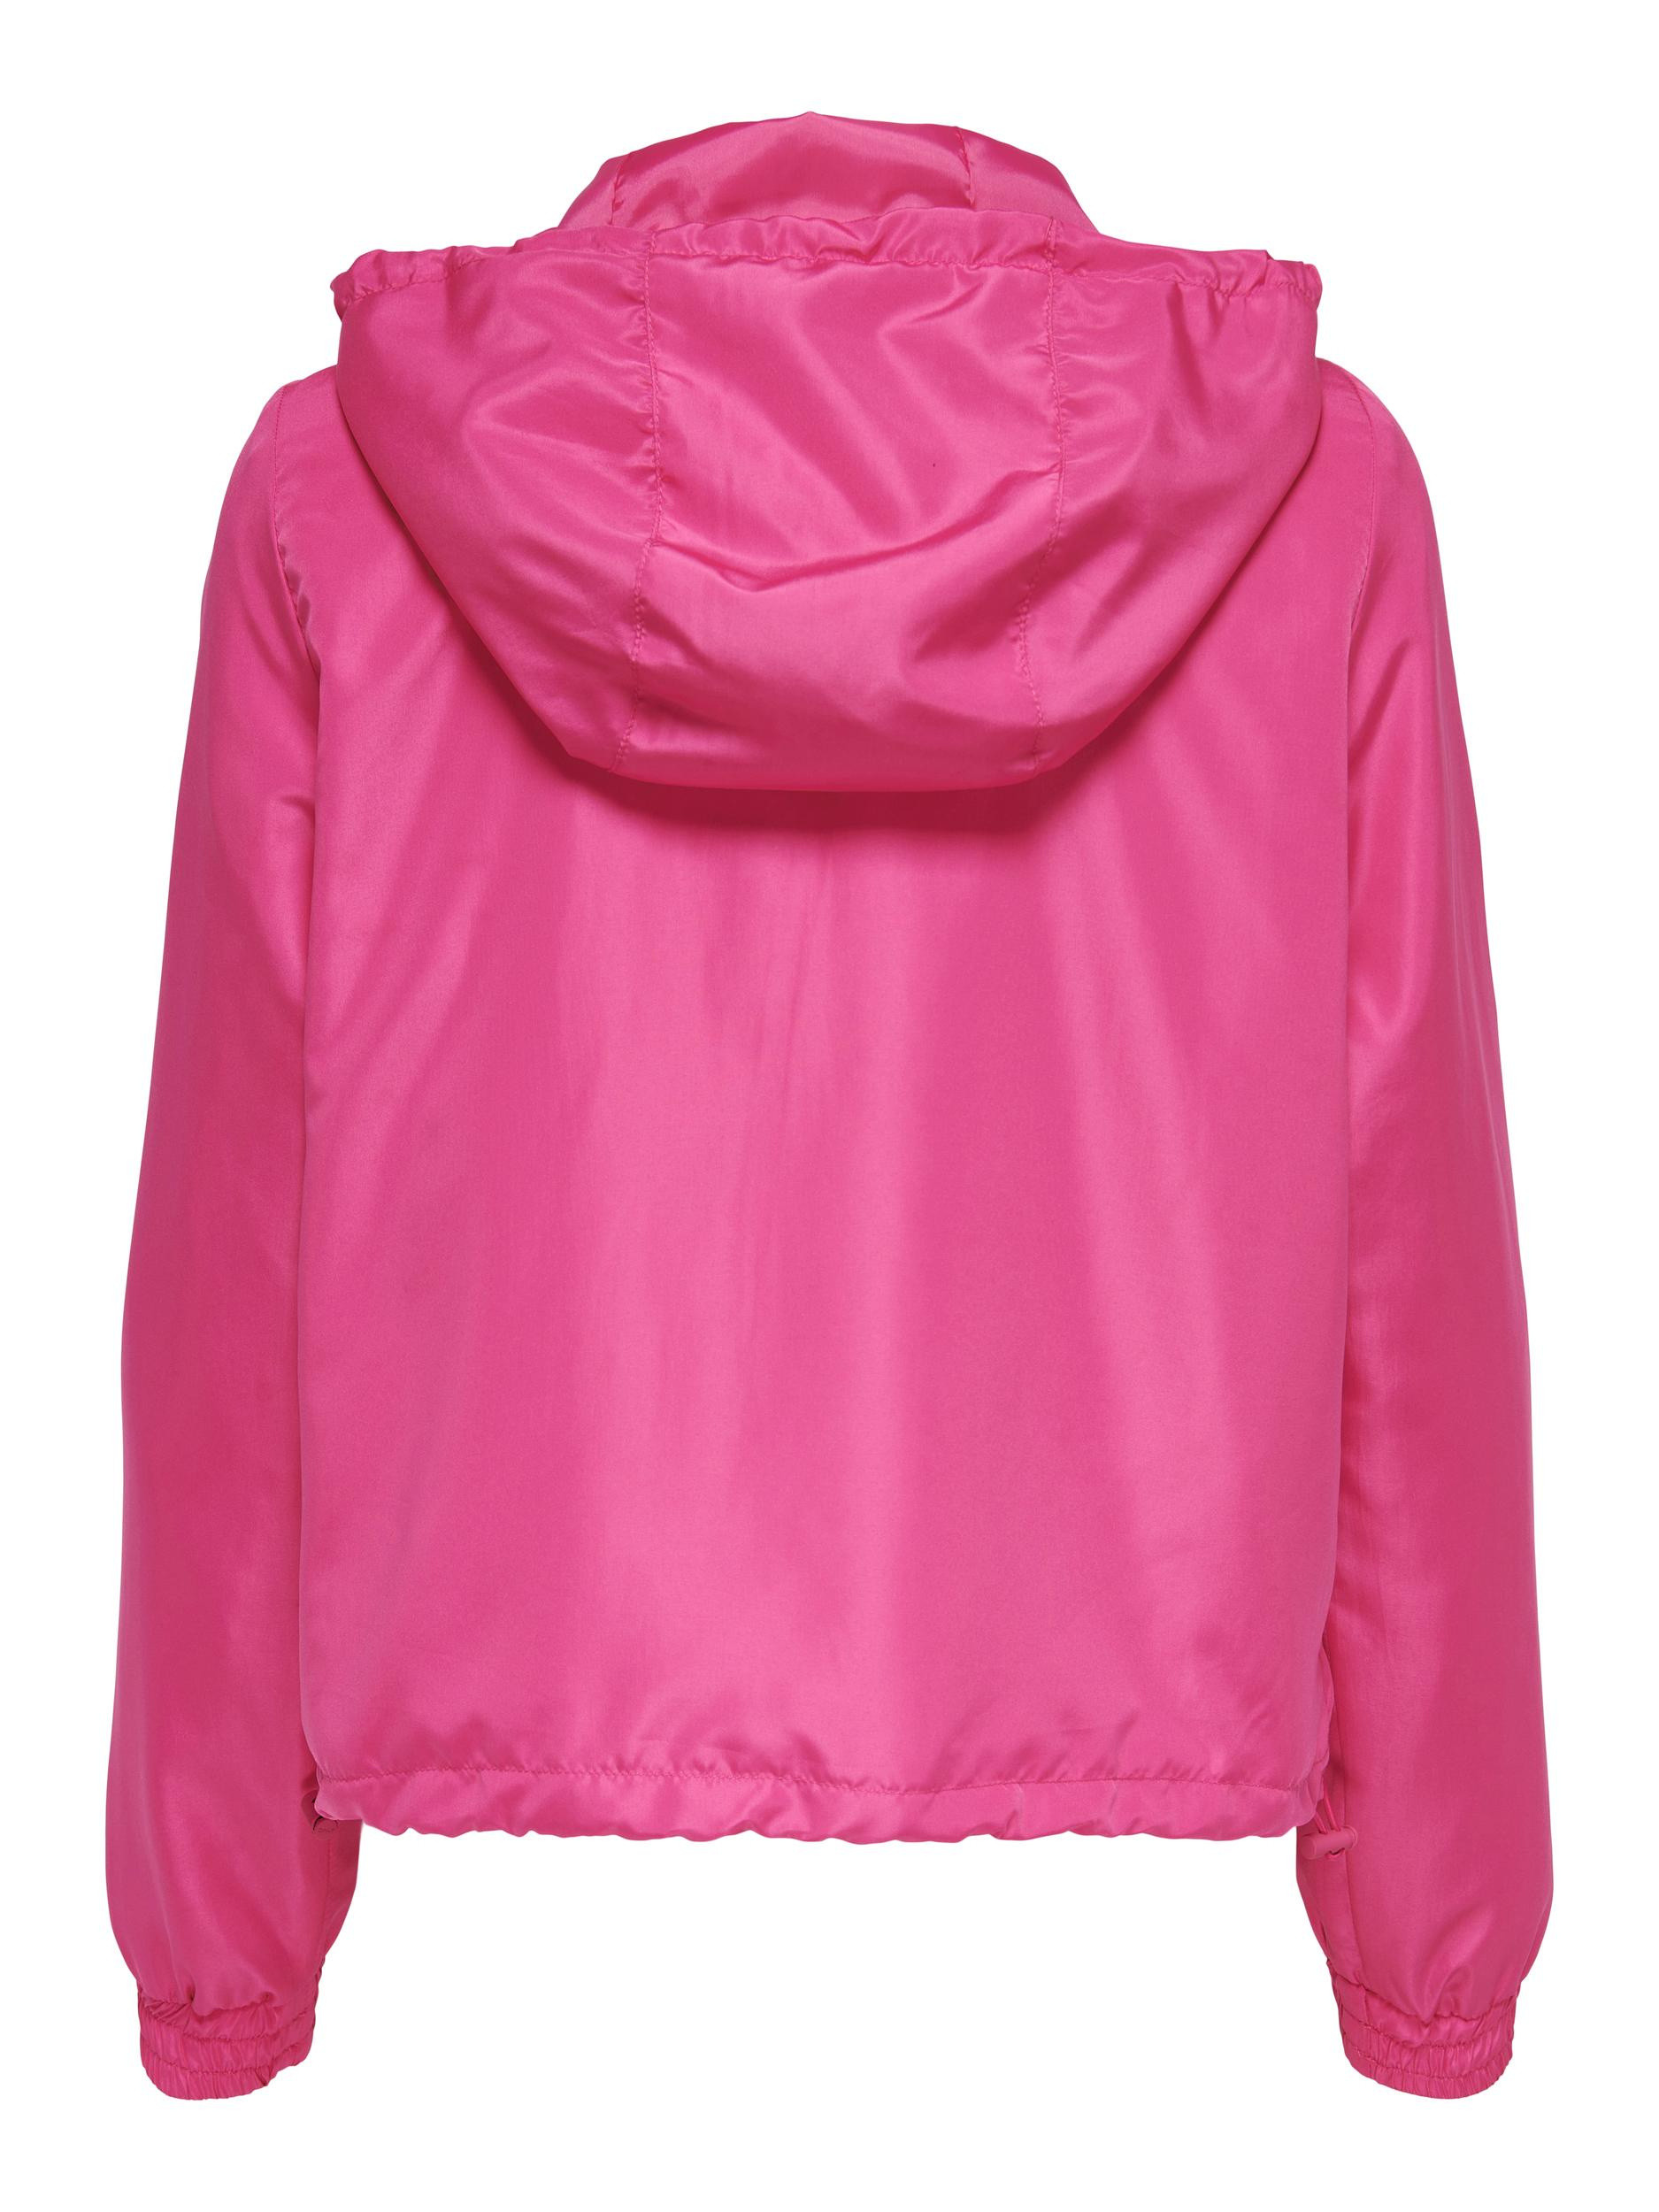 Only - Jacket with zip, Pink Fuchsia, large image number 1